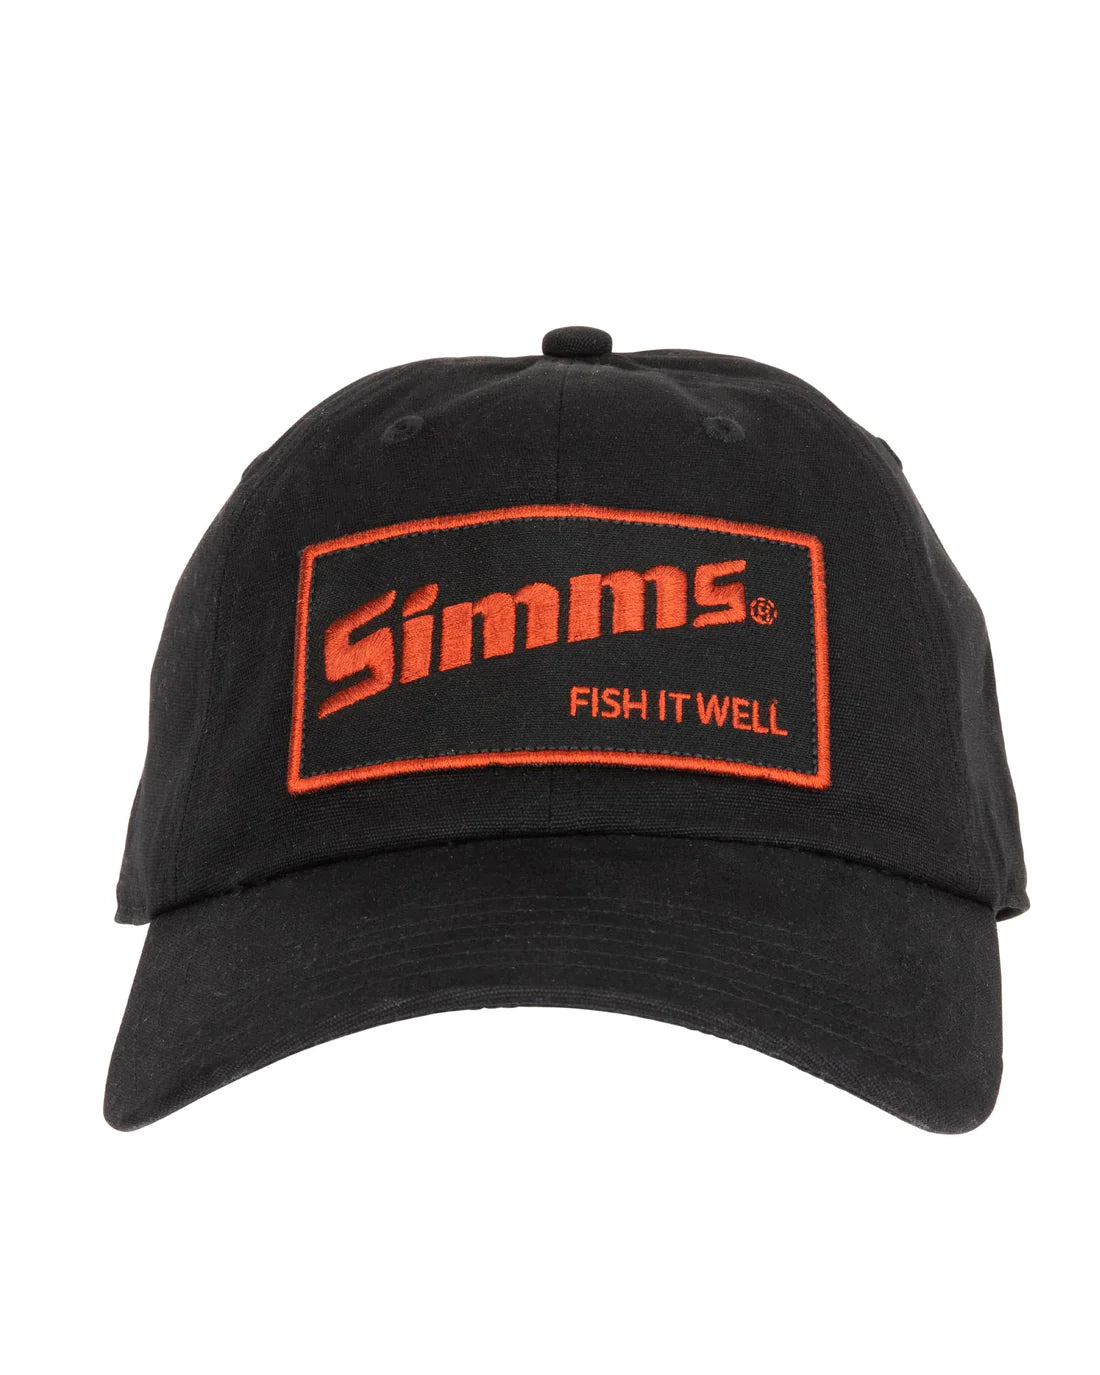 Simms Fish It Well Cap - Black -  - Mansfield Hunting & Fishing - Products to prepare for Corona Virus